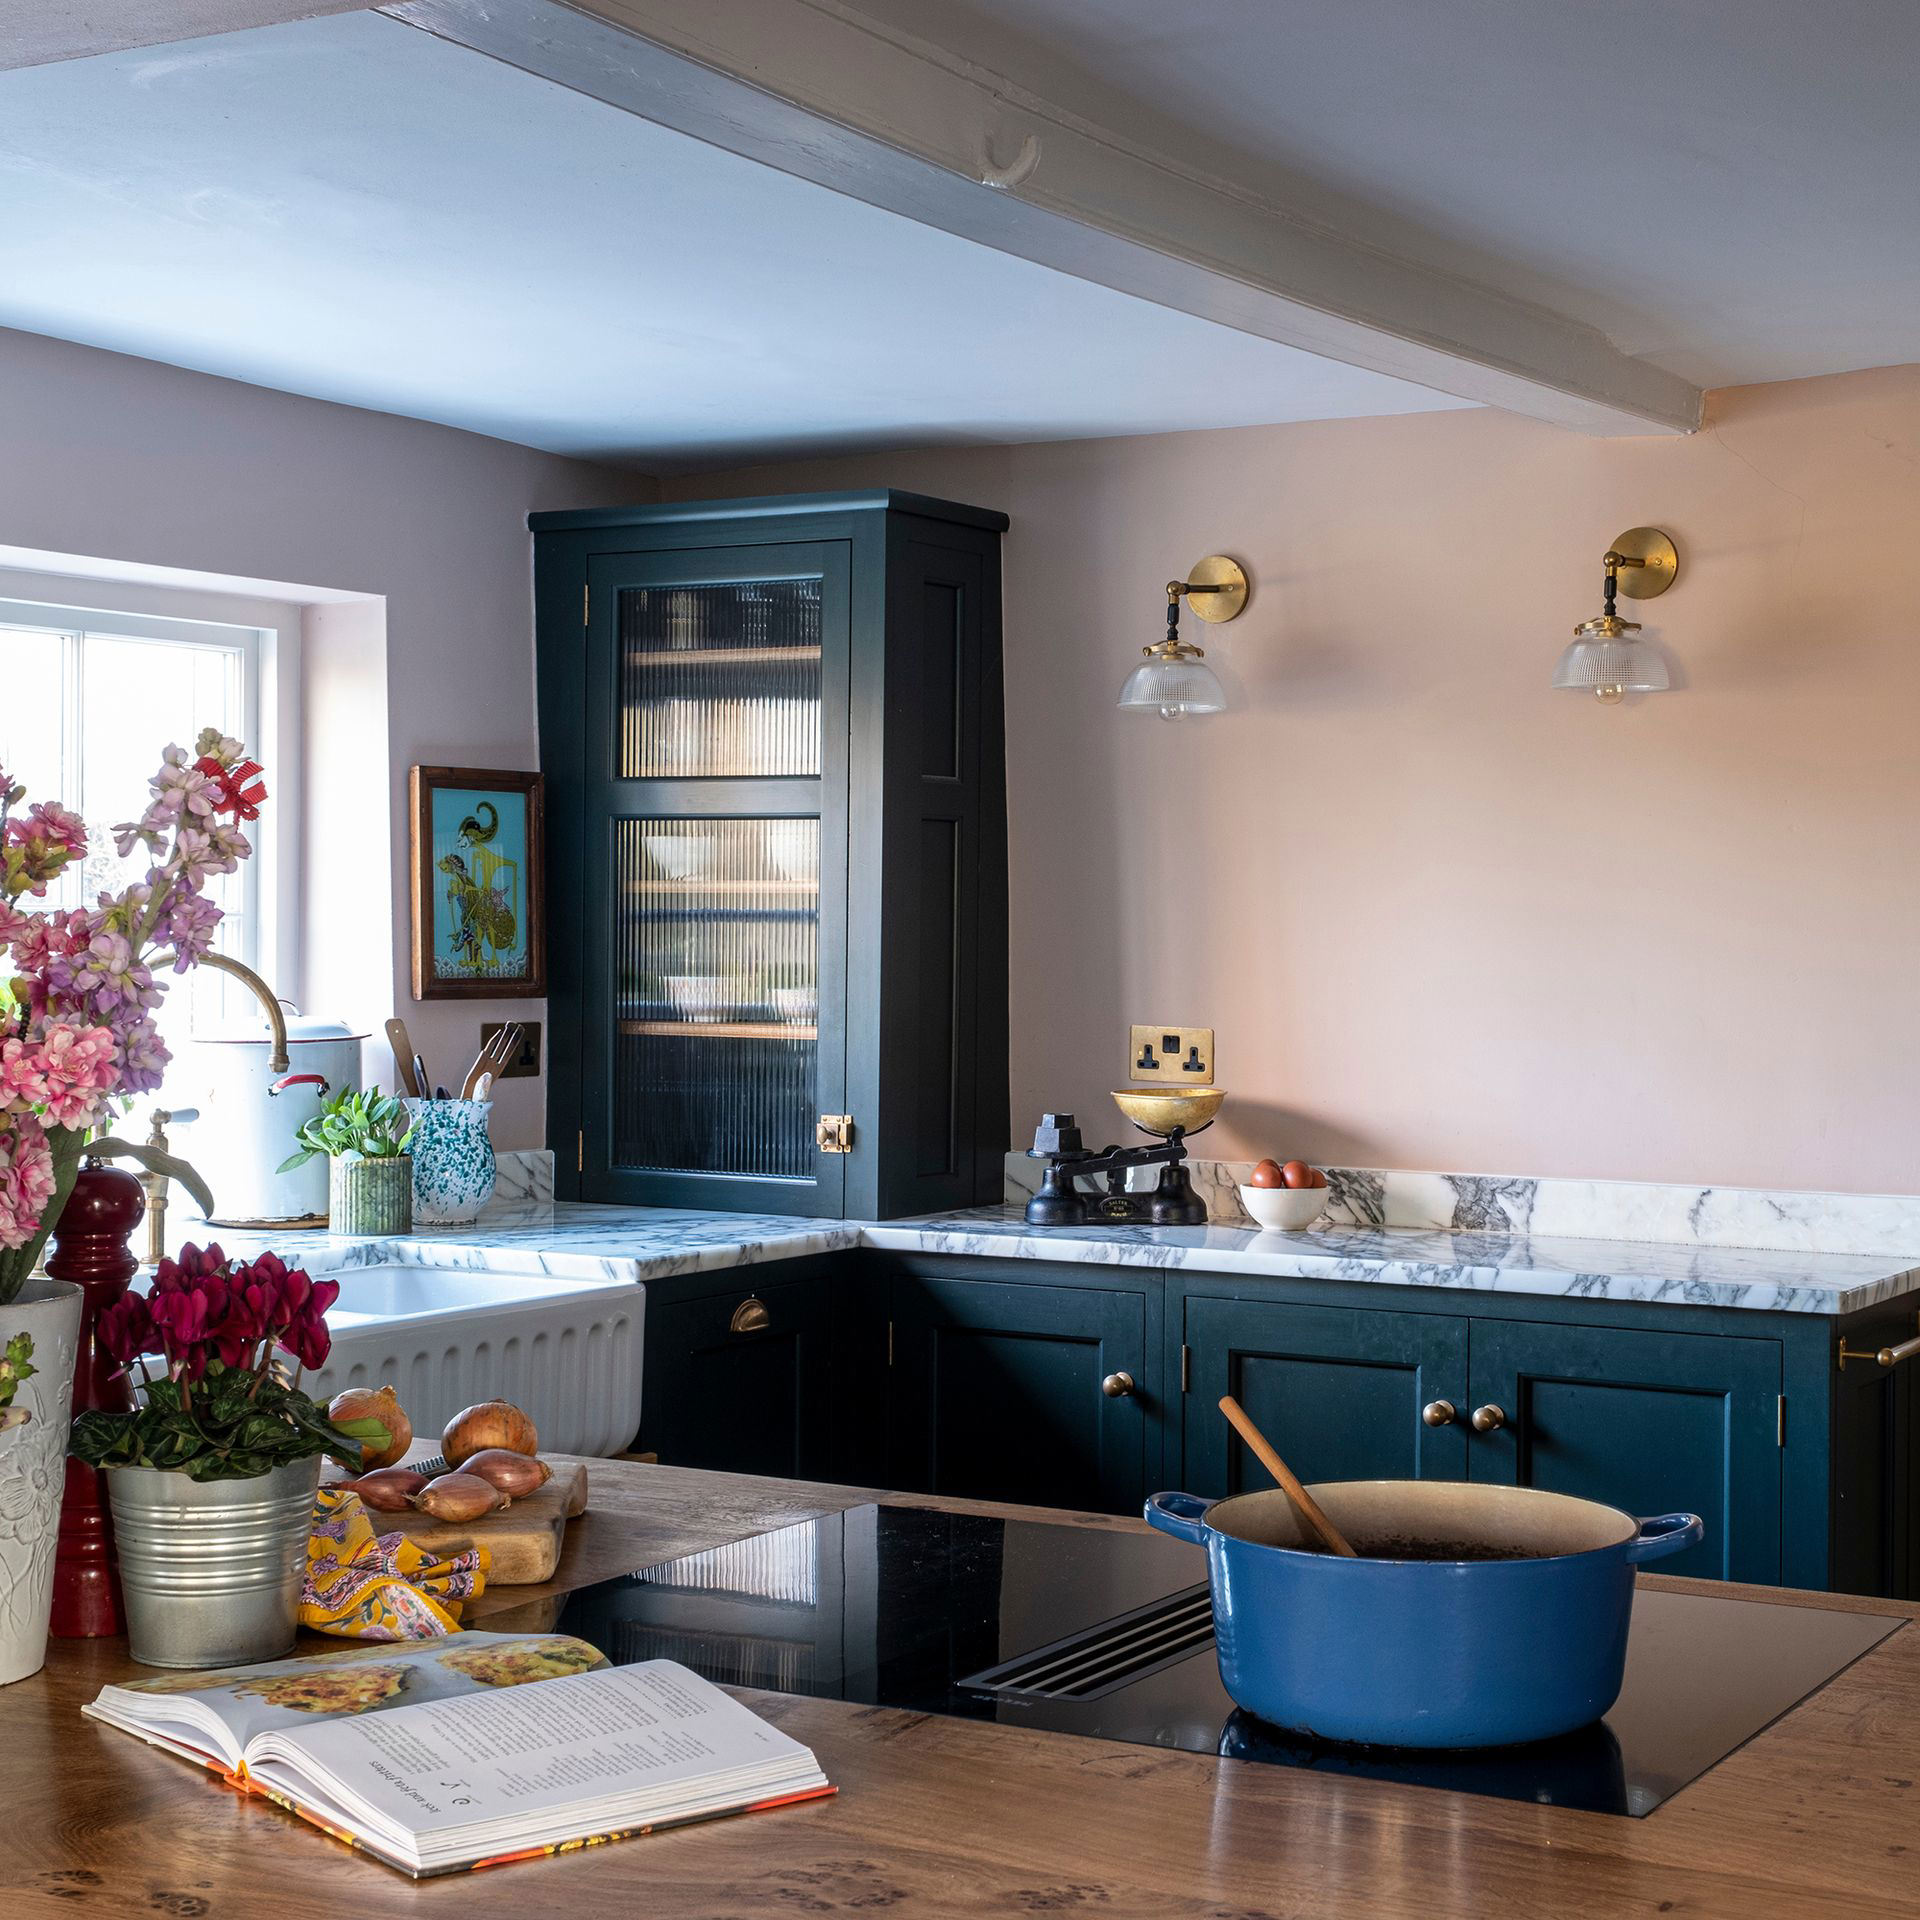 This beautiful cottage kitchen proves size shouldn't get in the way of ...